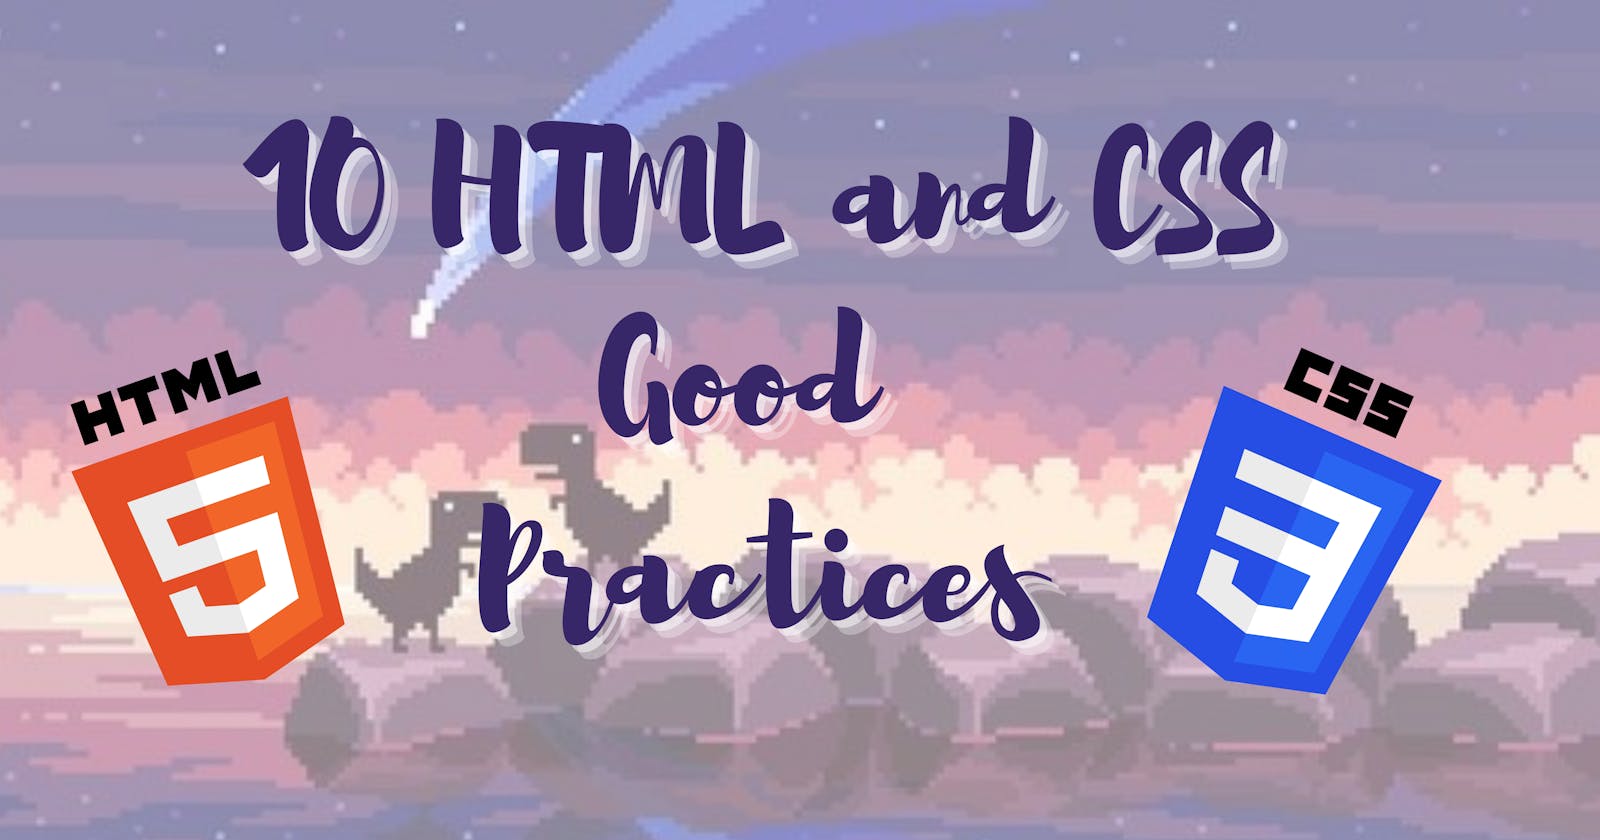 10 HTML and CSS Good Practices 🐅🐅